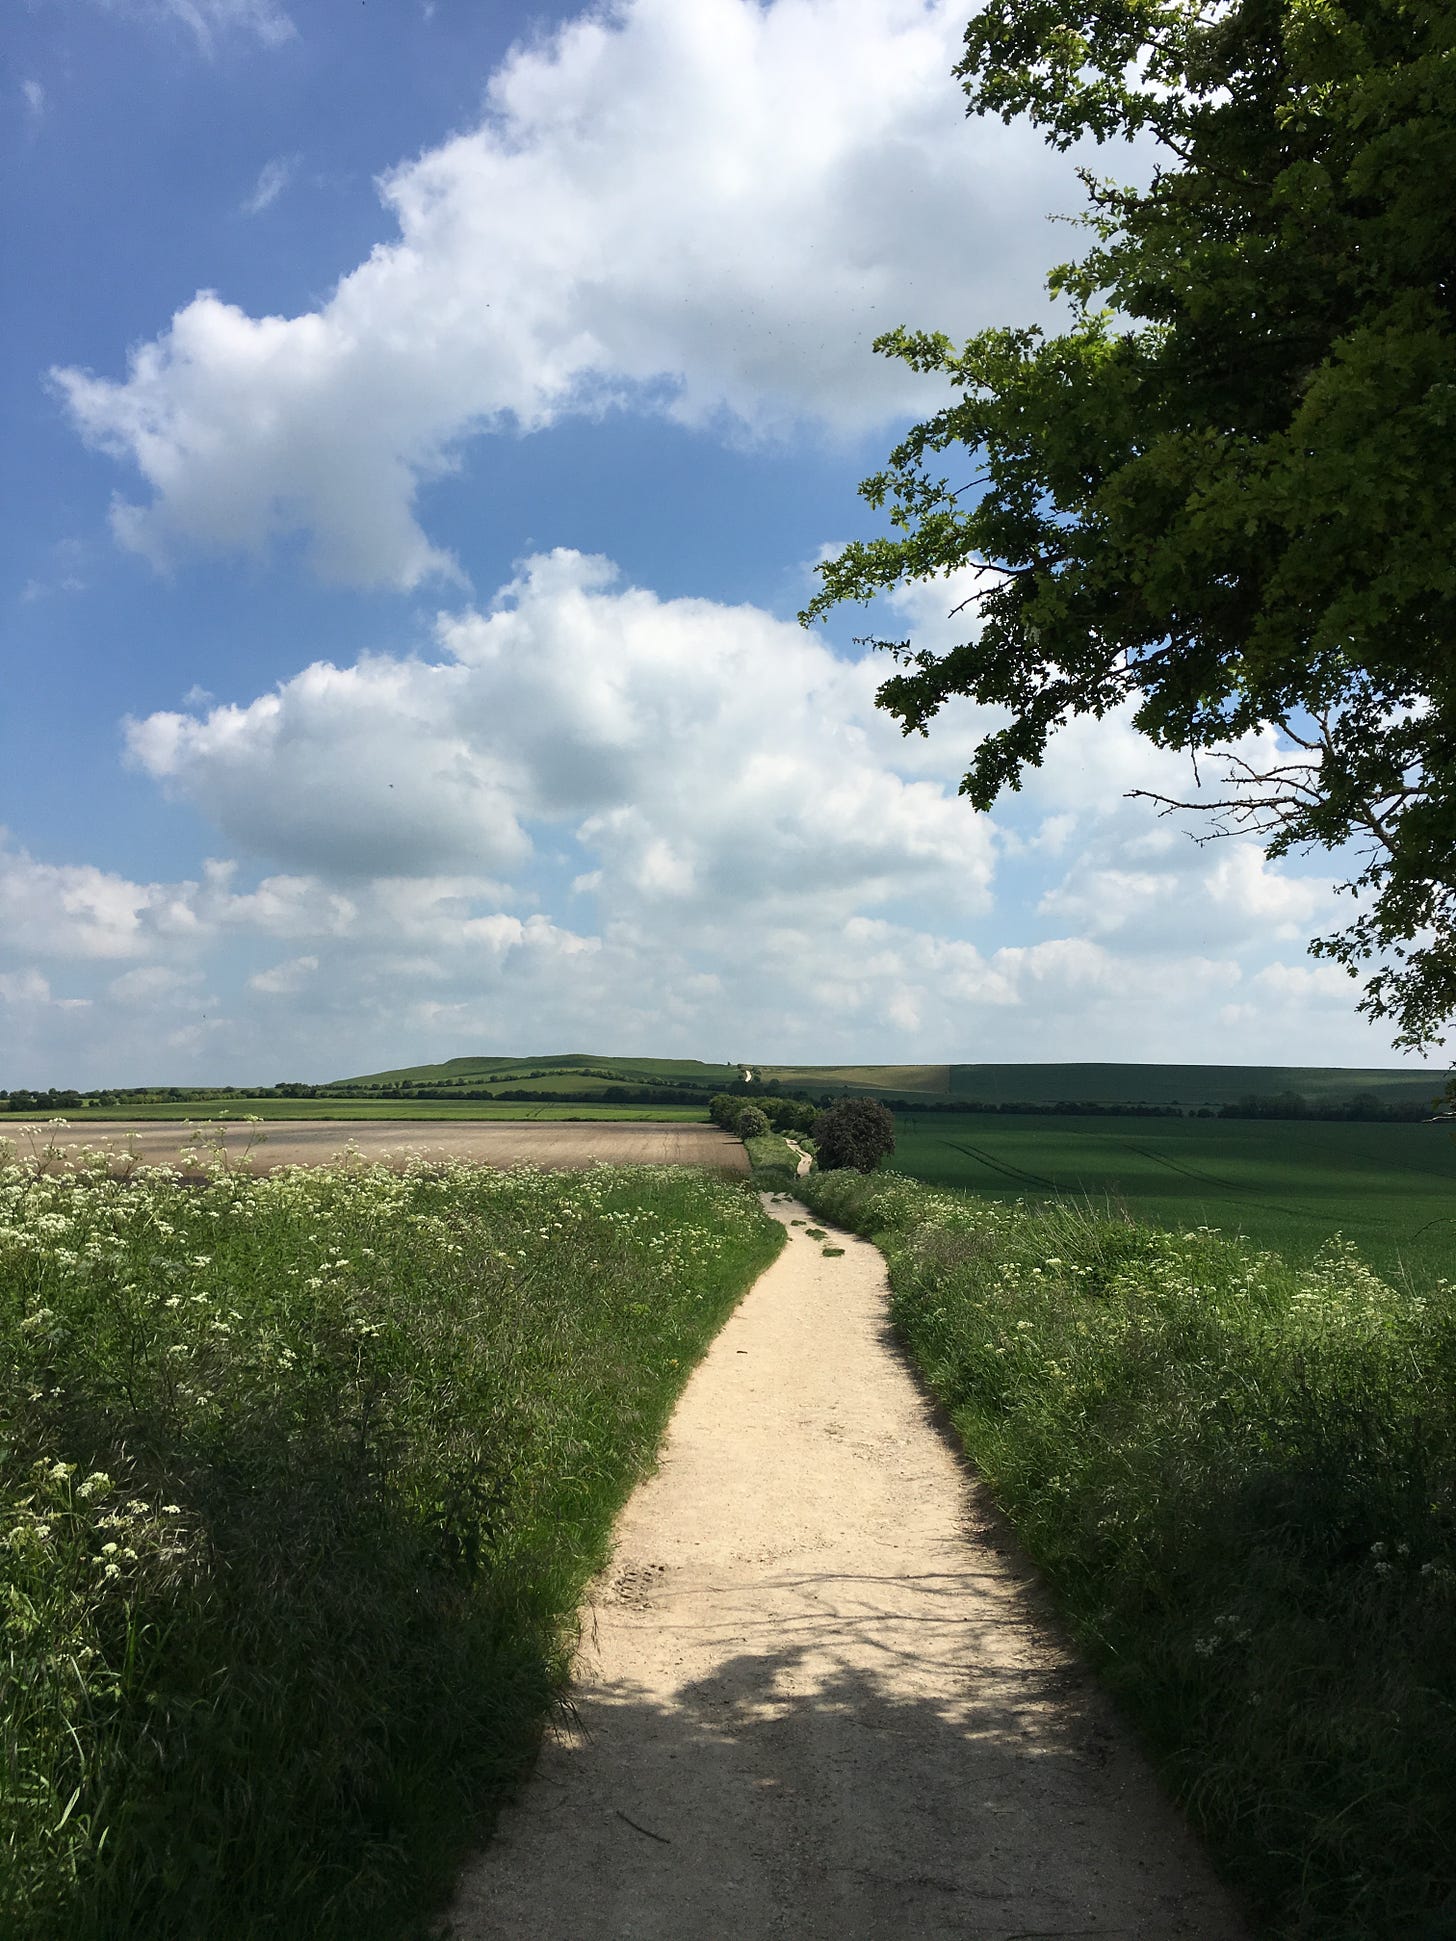 The Ridgeway near Ashbury, UK, a light-colored walking track crossing fields, with a hill and clouds in the distance.